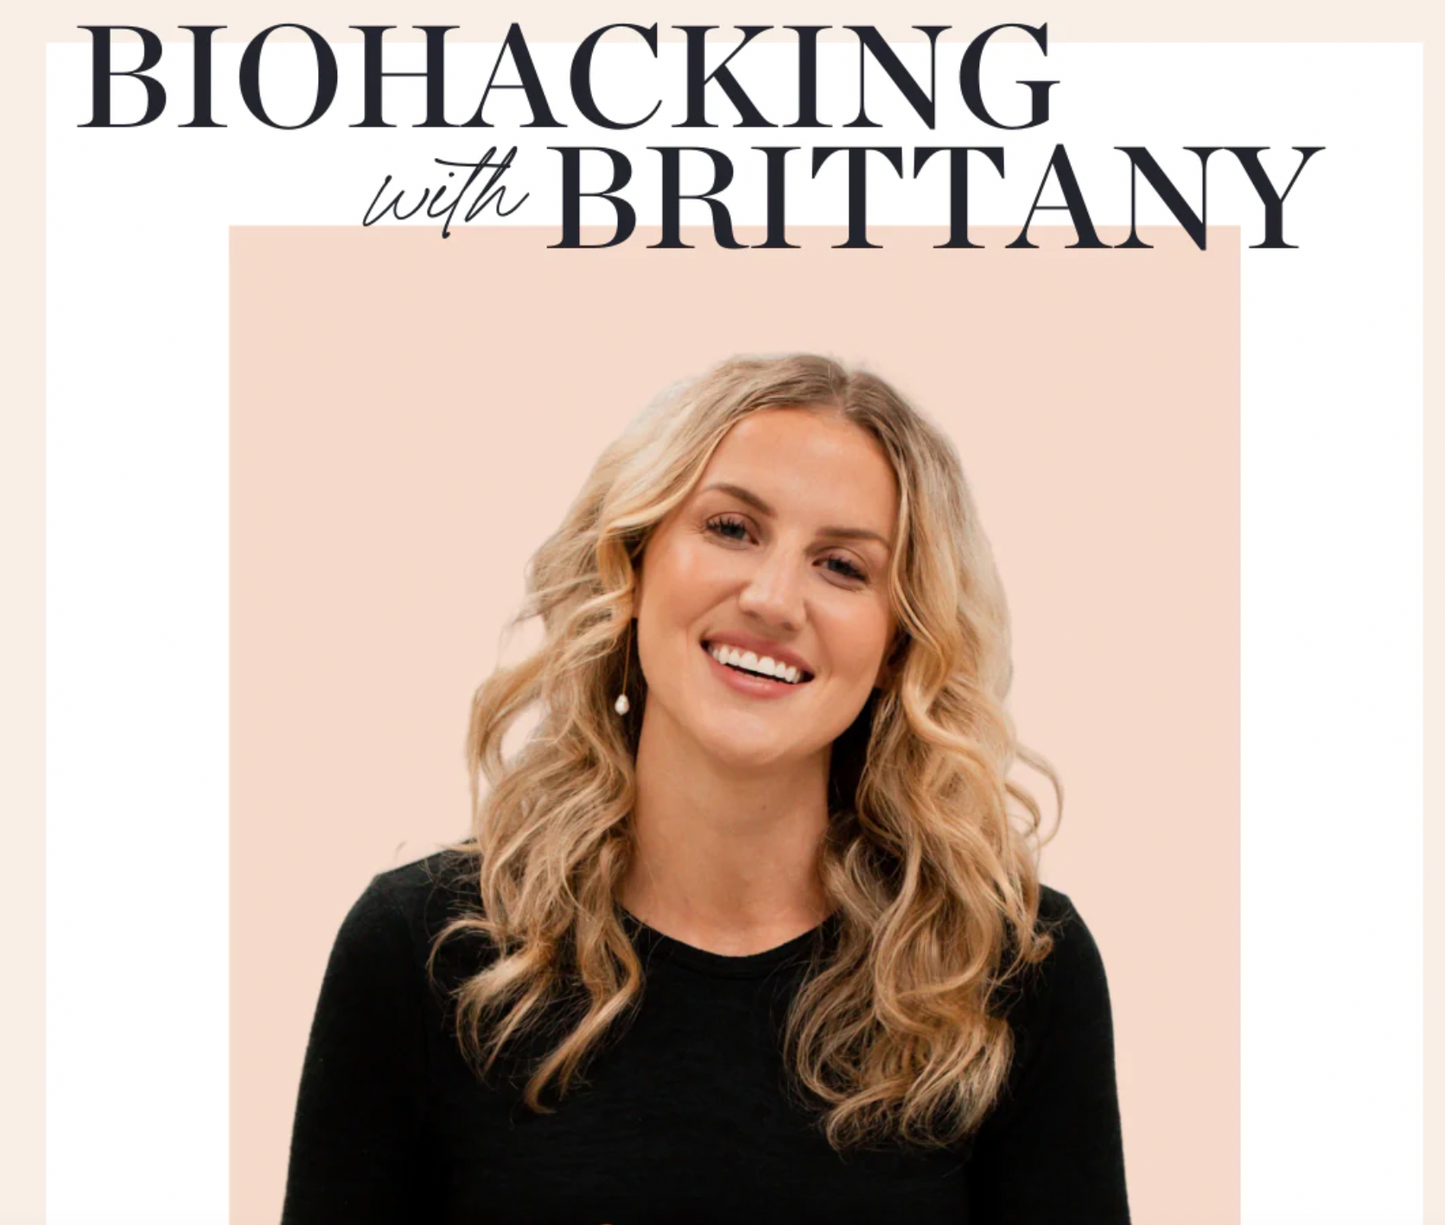 BioHacking with Brittany Podcast with Dr. Michael E. Platt